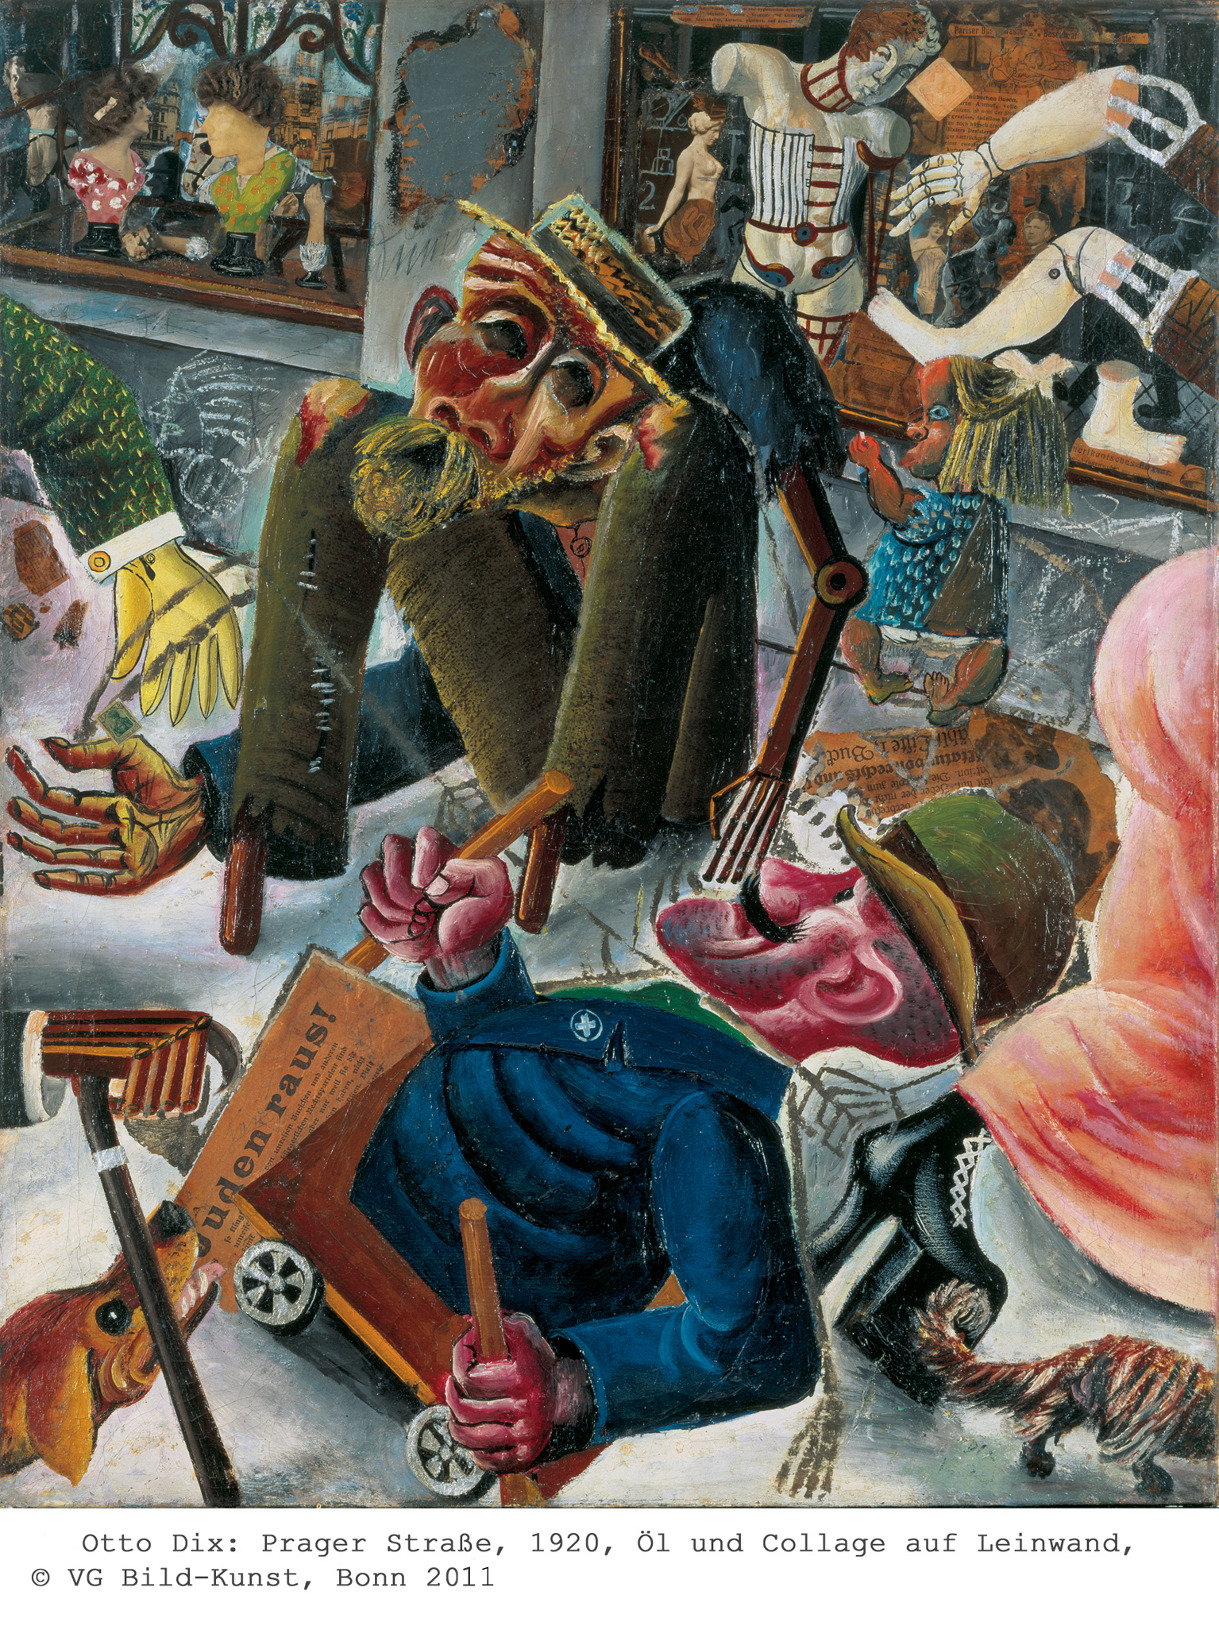 the-seed-of-europe:  Prager Strasse and Die Skatspieler, Otto Dix 1920. “Dix added